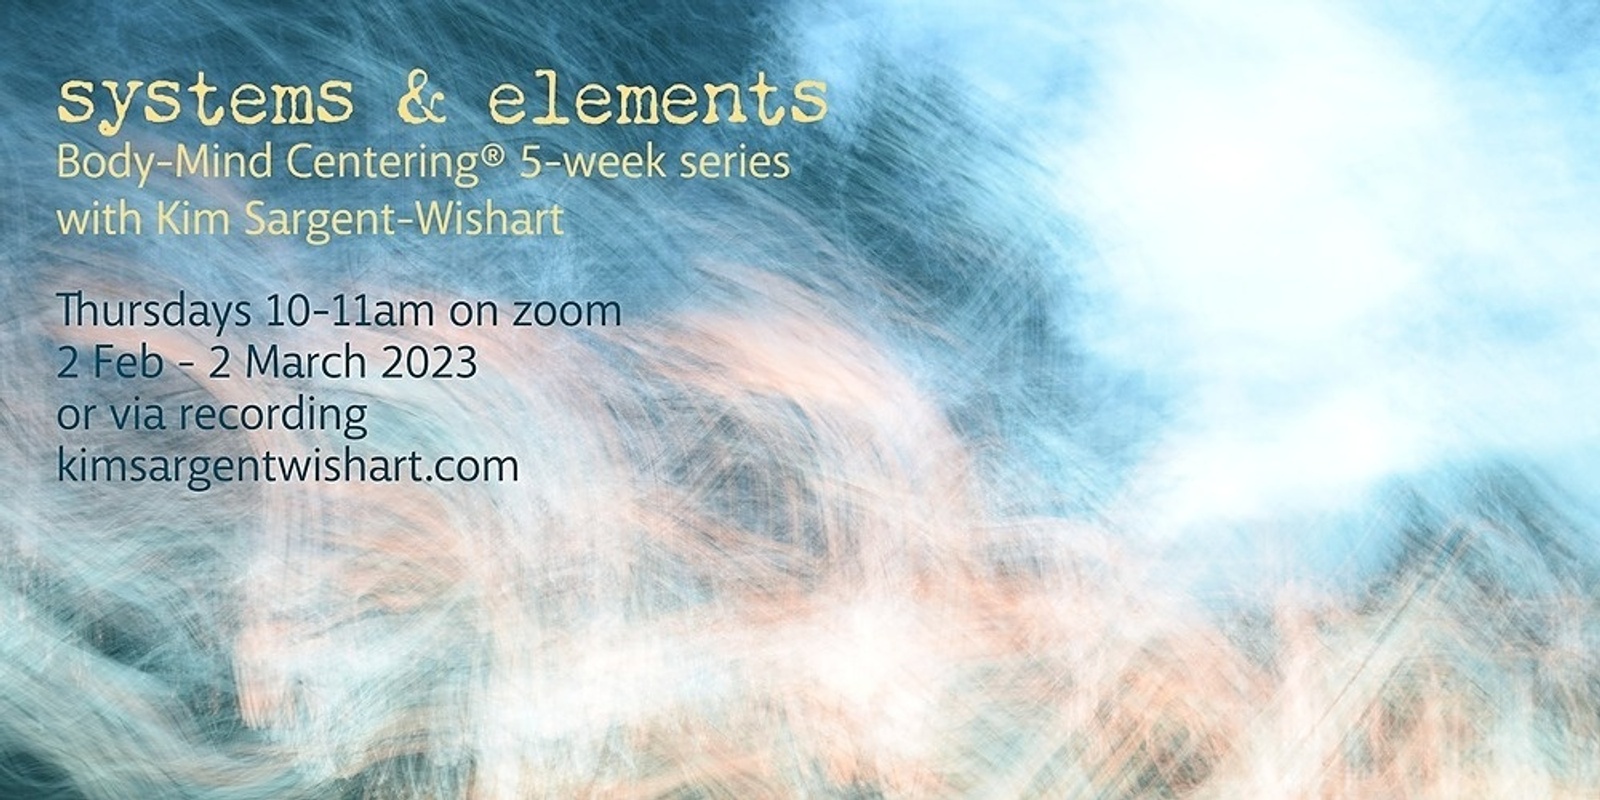 Systems & Elements: 5-week series in Body-Mind Centering® & movement